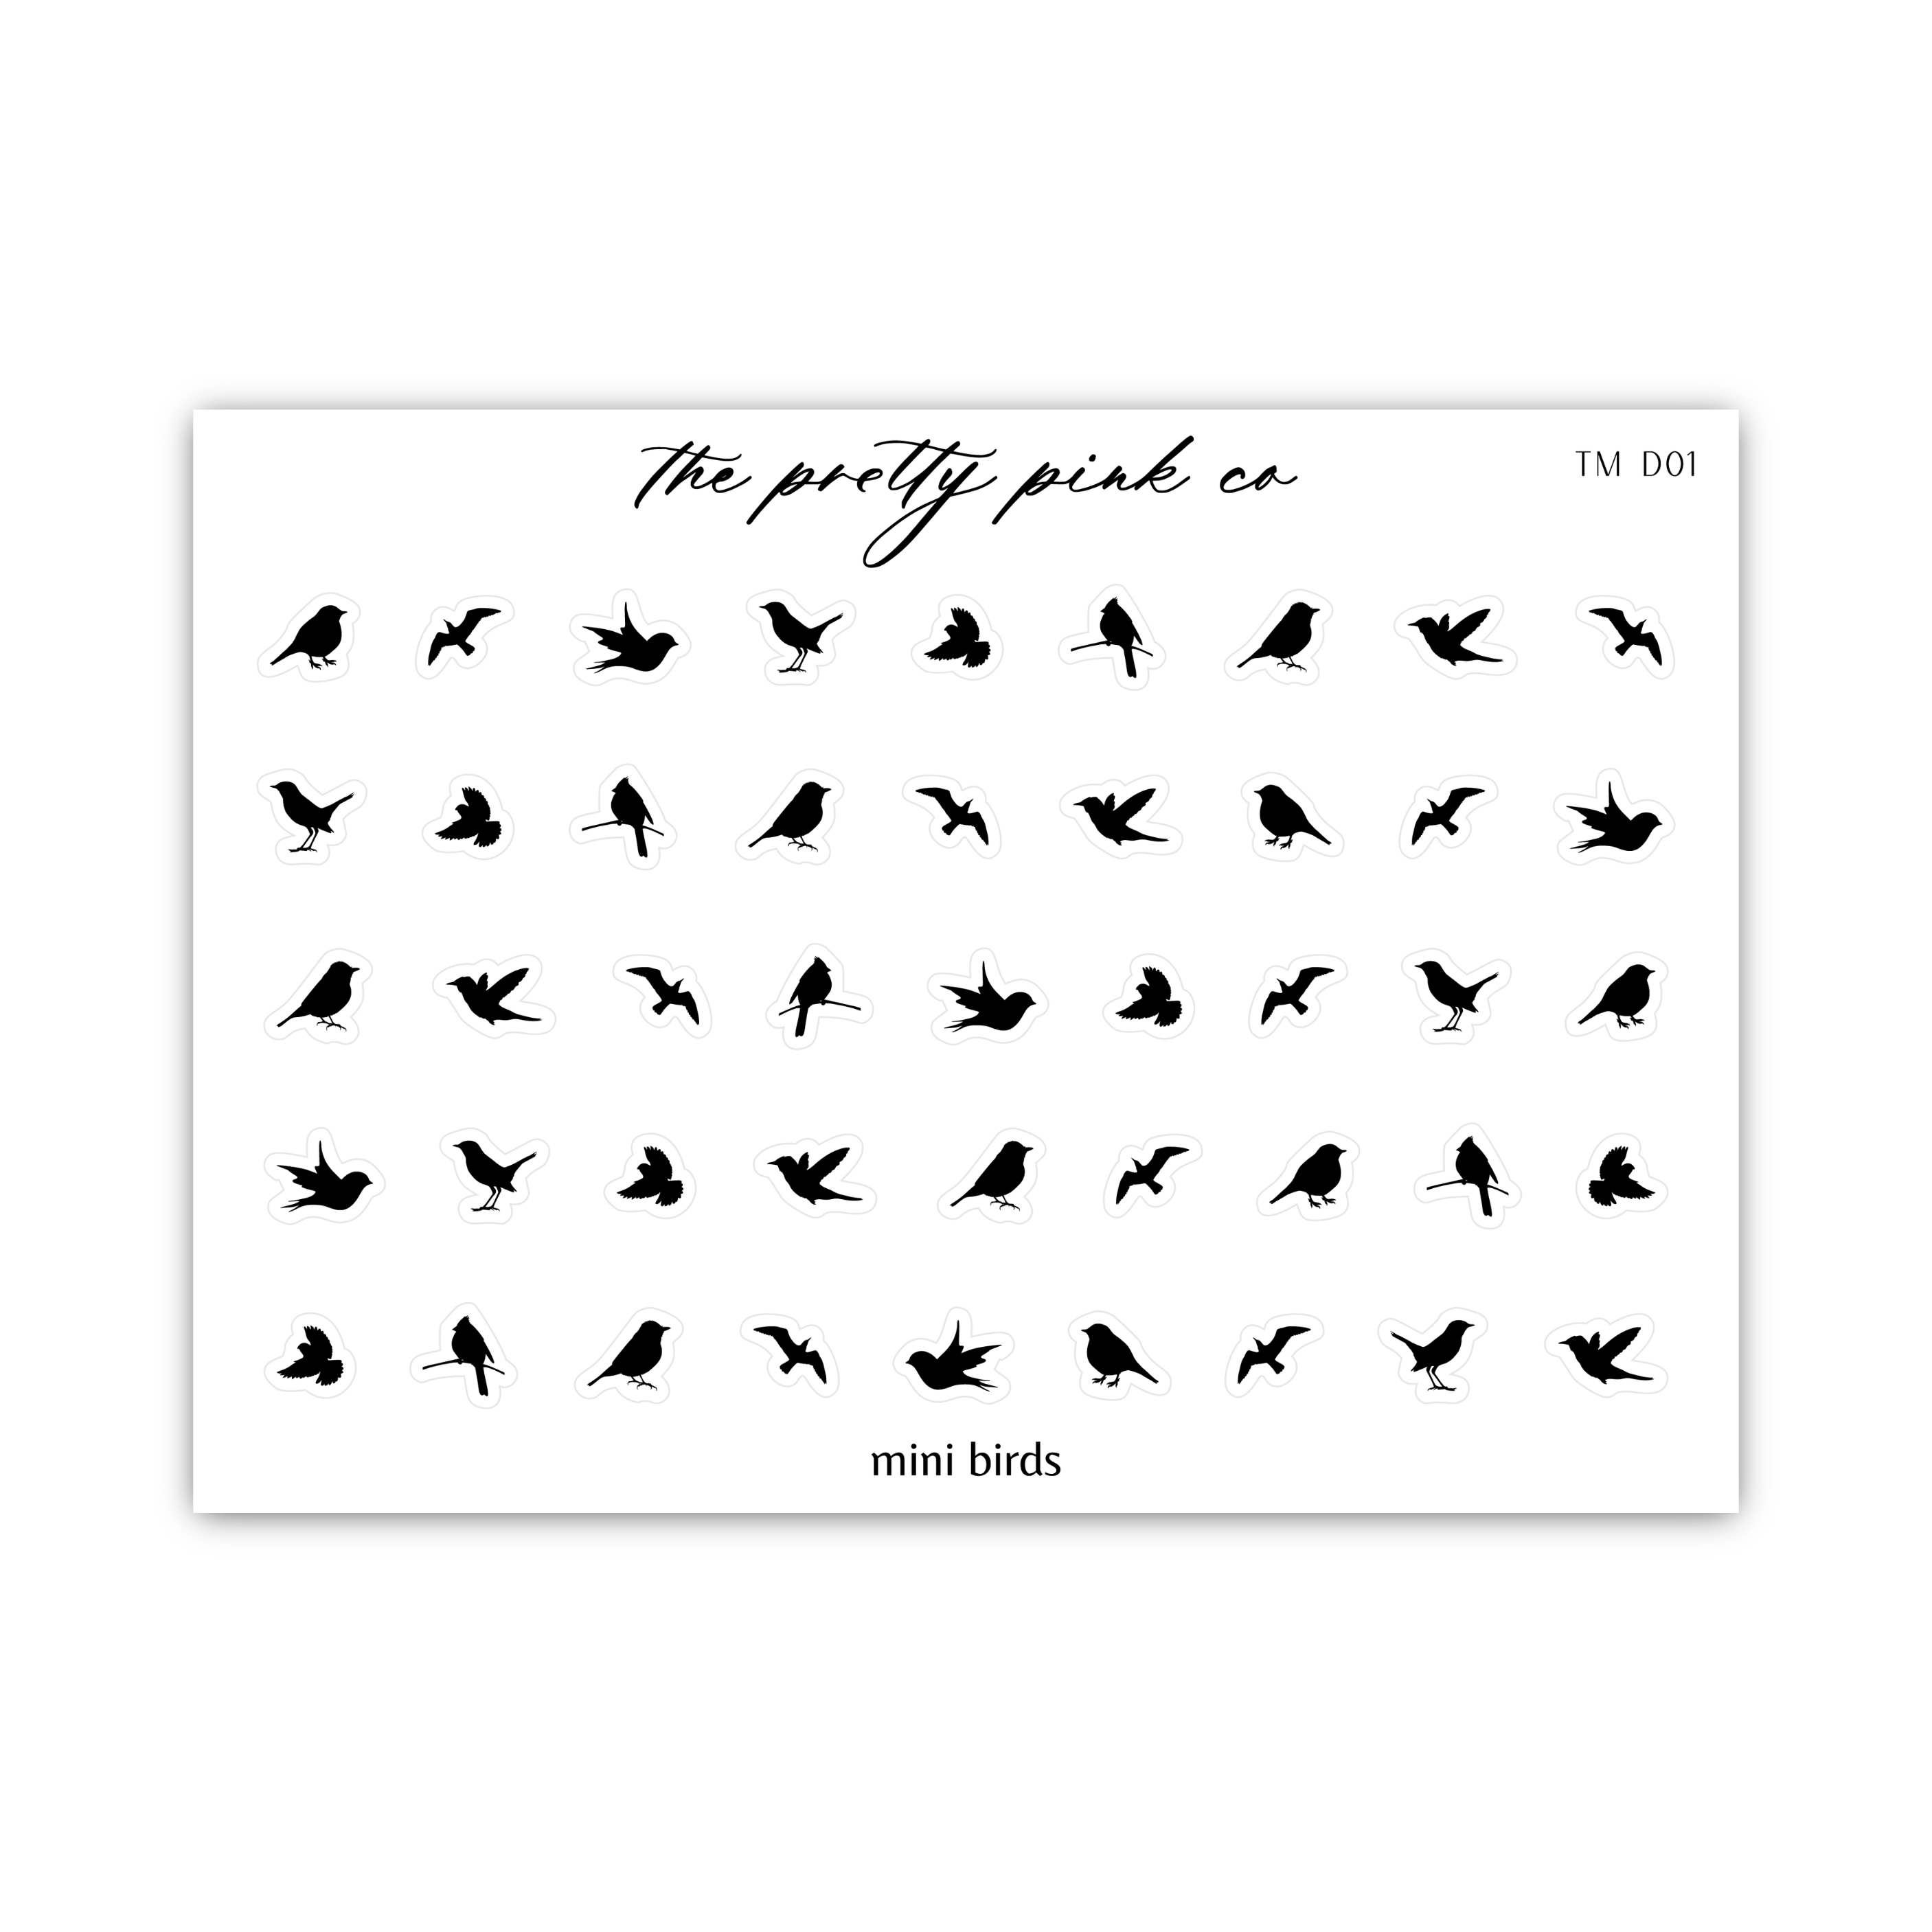 a black and white photo of birds on a white background